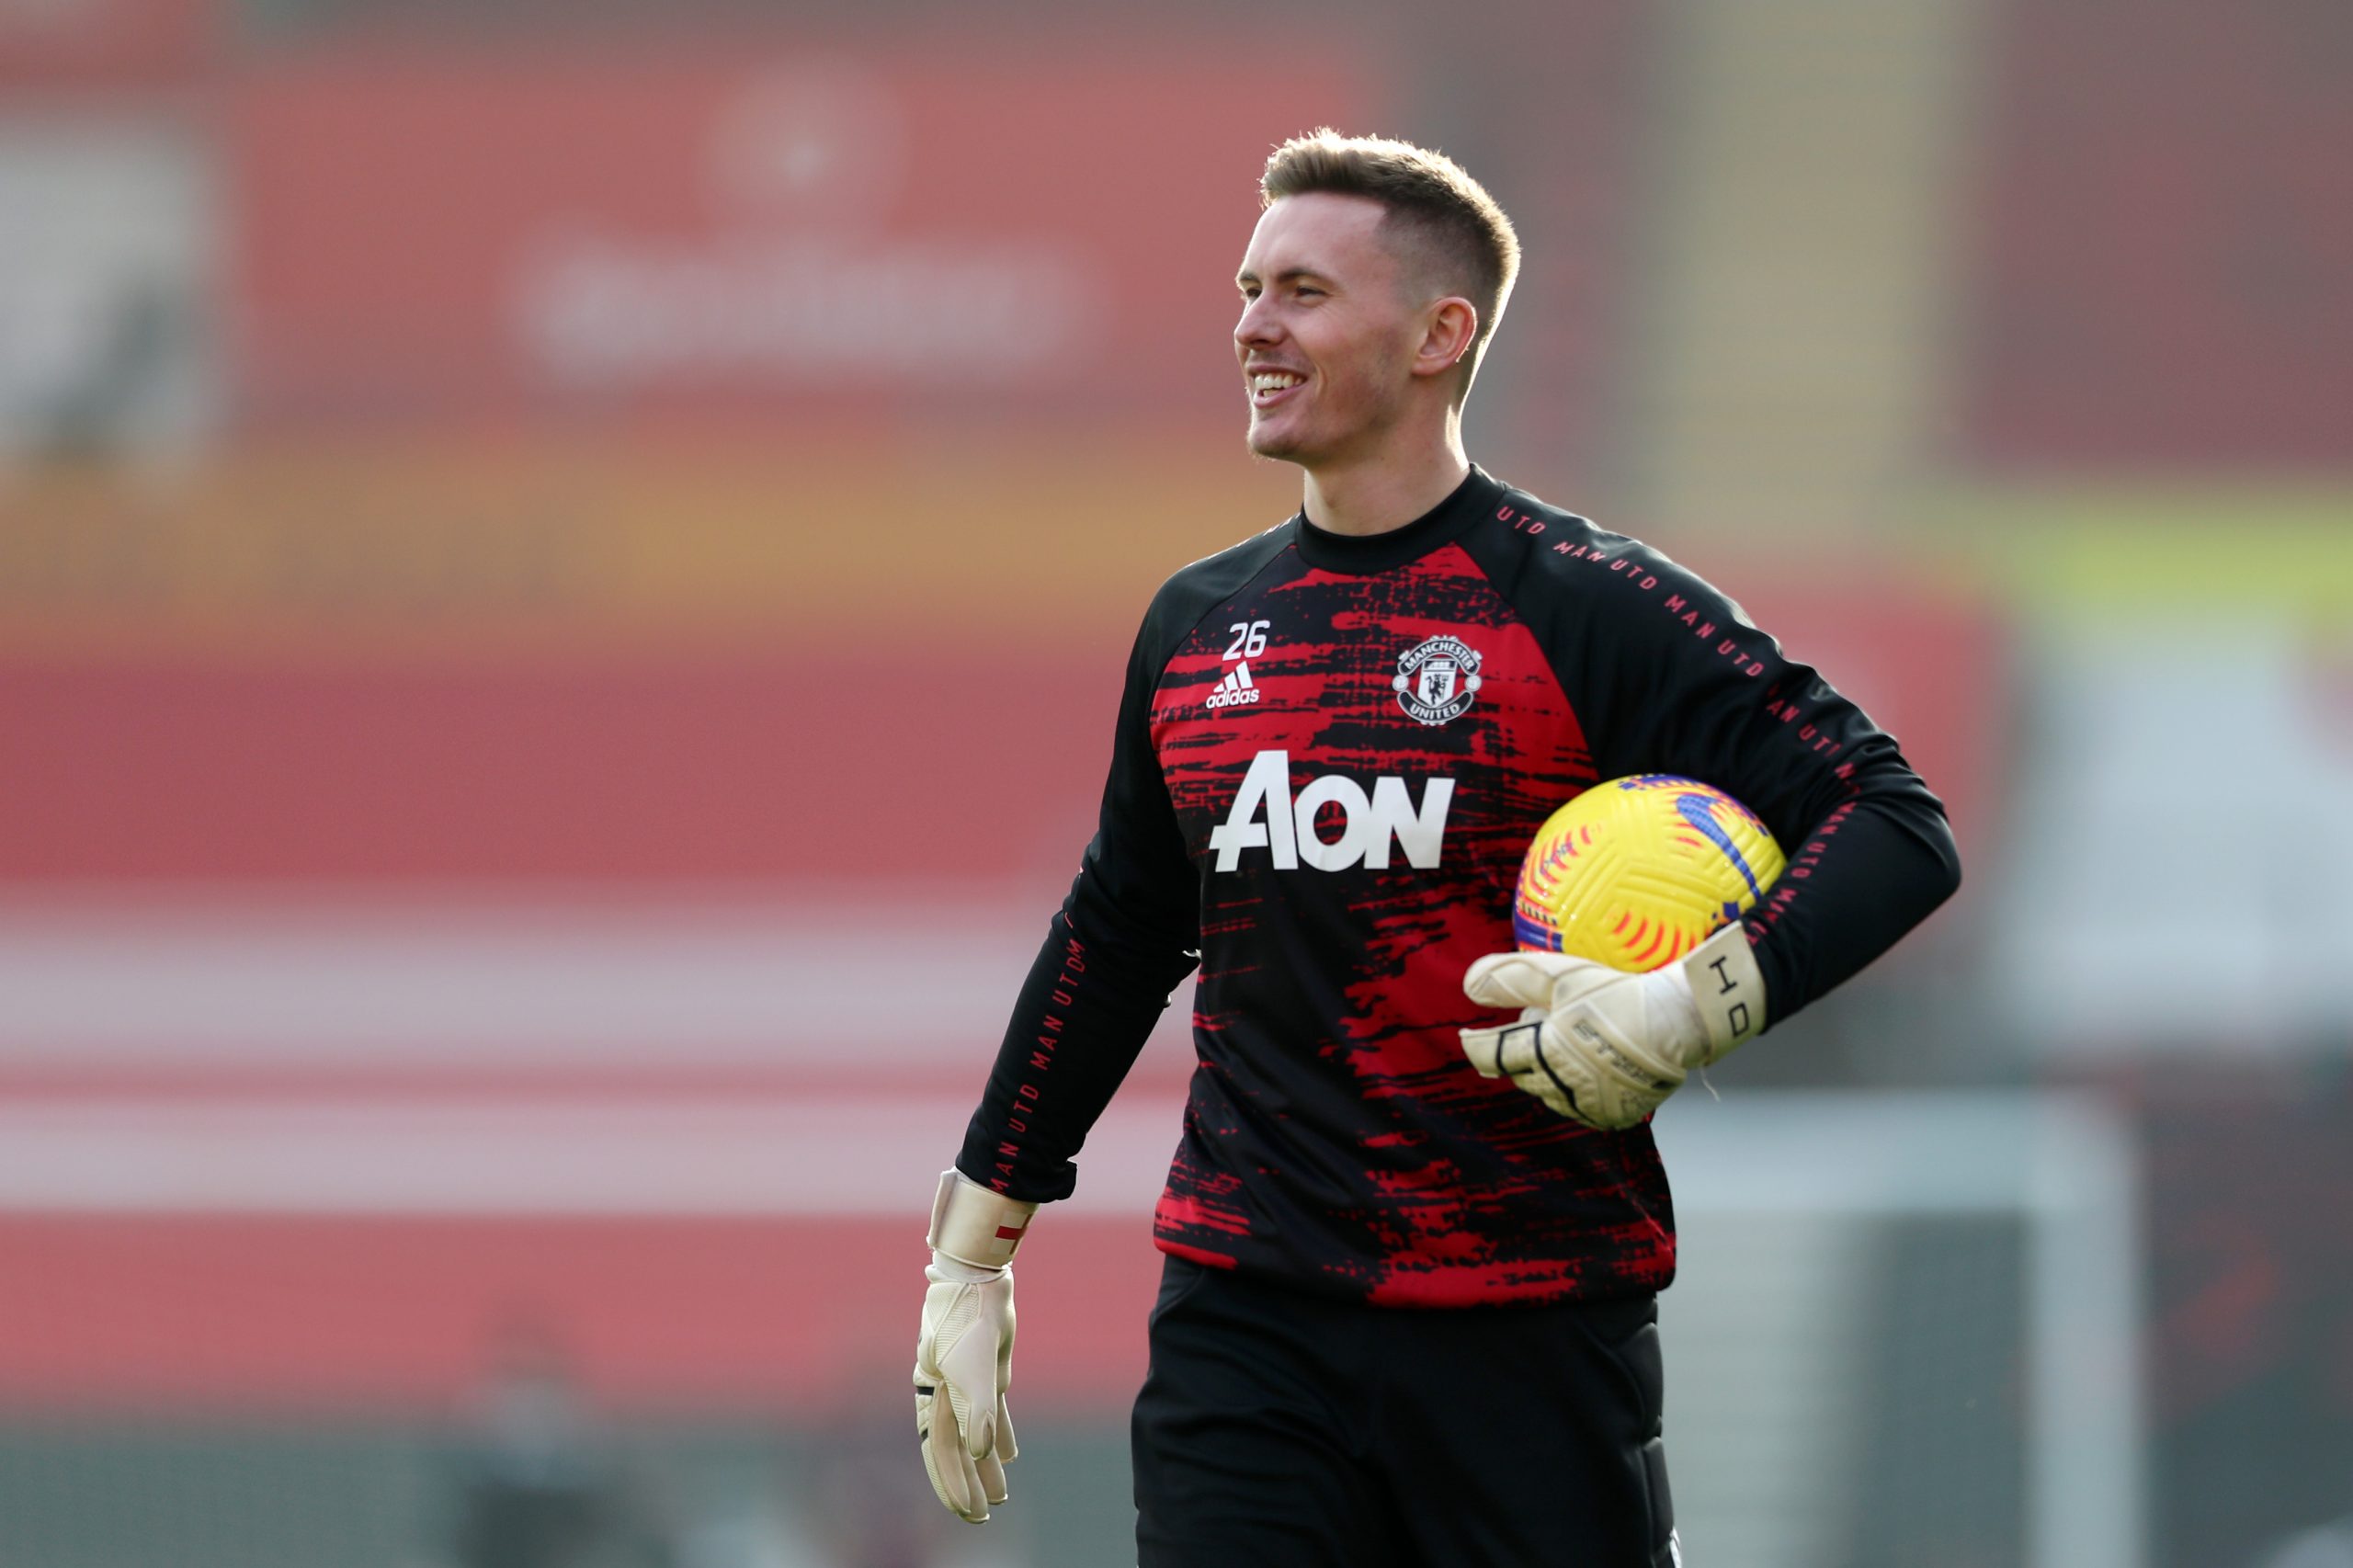 Ralf Rangnick praises Manchester United star Dean Henderson following his performance against Young Boys.